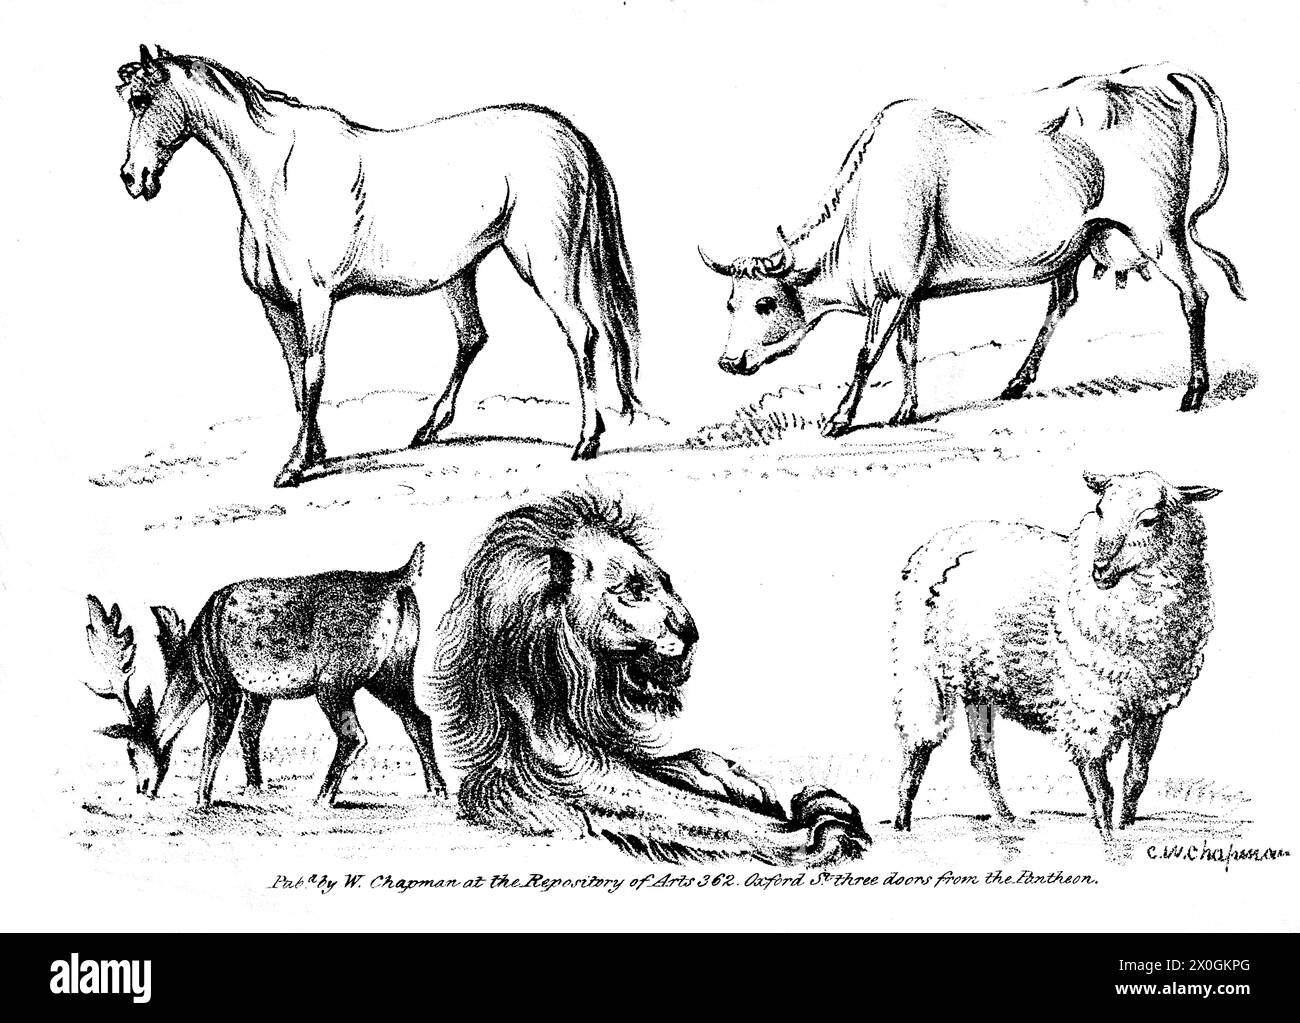 Animal Lithographs - Published by C.W. Chapman at the Repository of Arts, 362 Oxford Street, three doors from the Pantheon Stock Photo